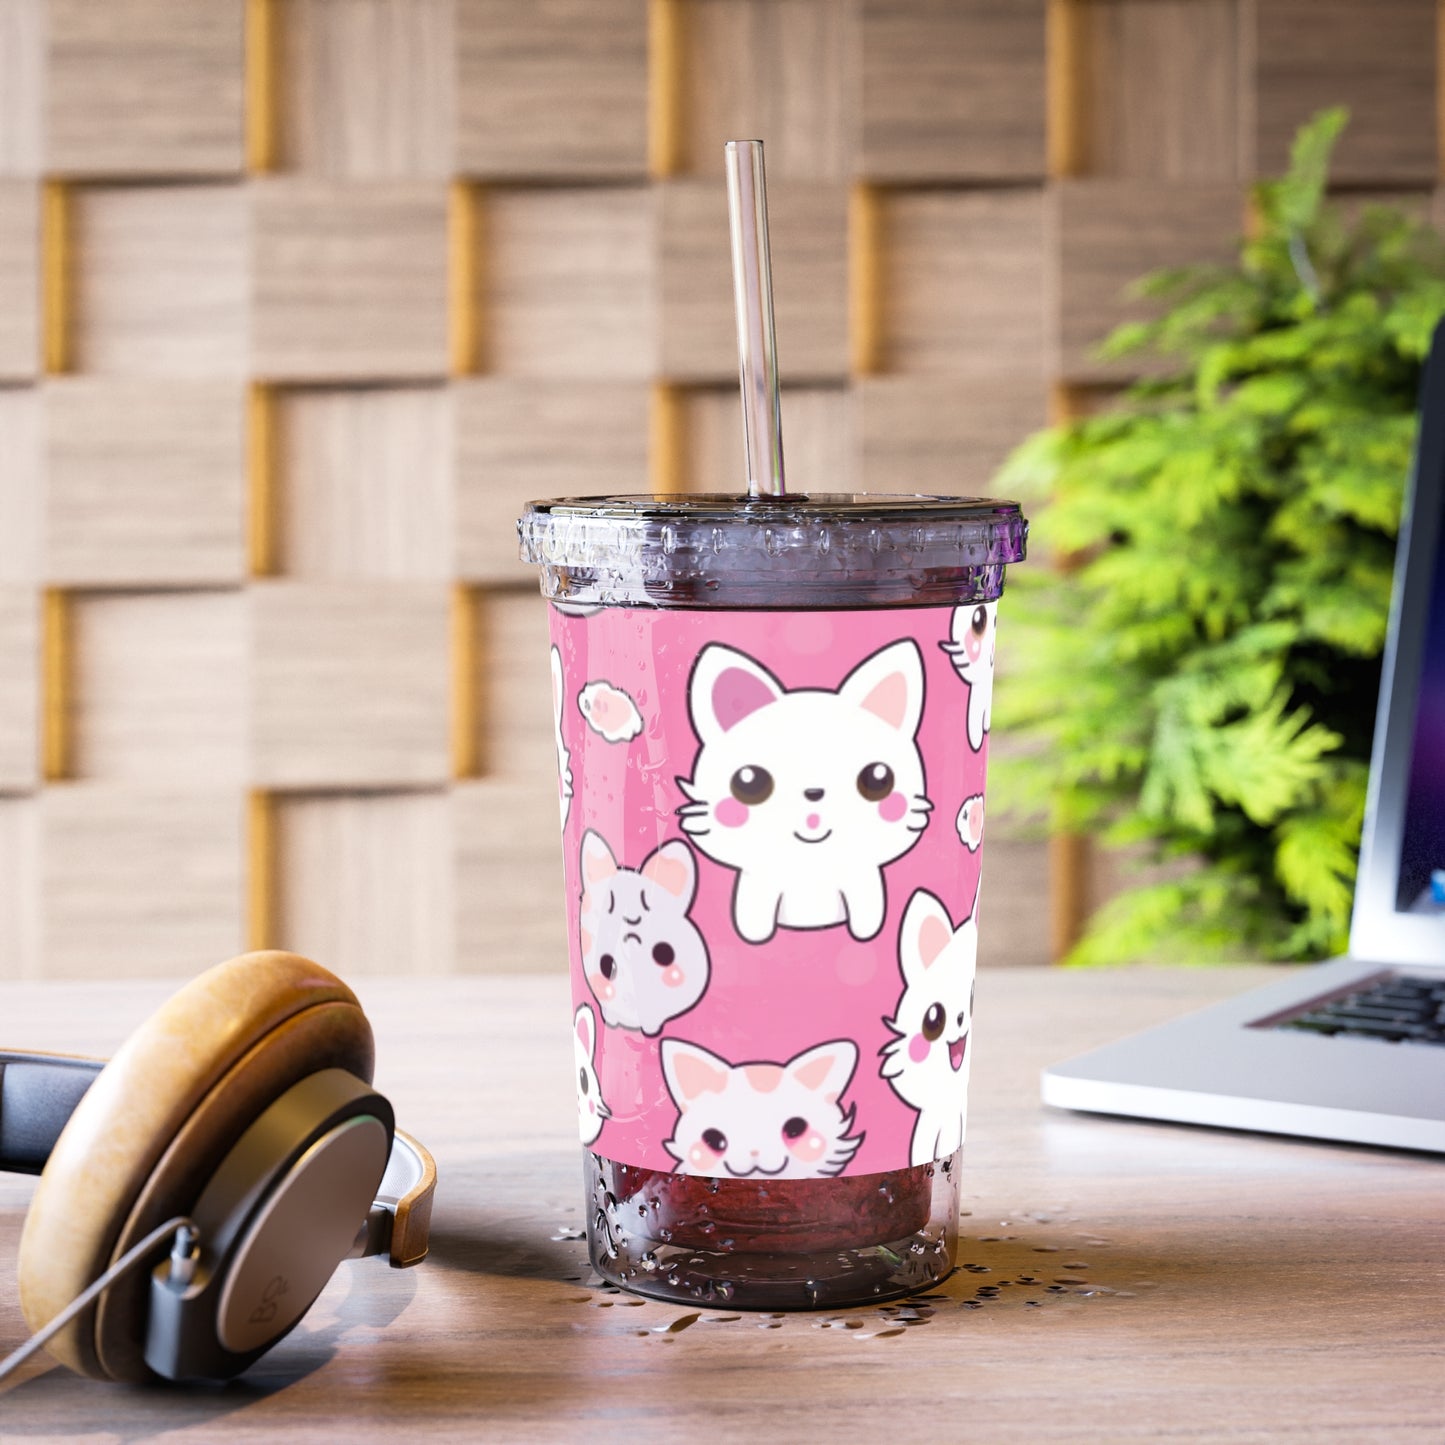 Cartoon Anime Kitten, Cat, Kitty - Cute and Colorful - Suave Acrylic Cup